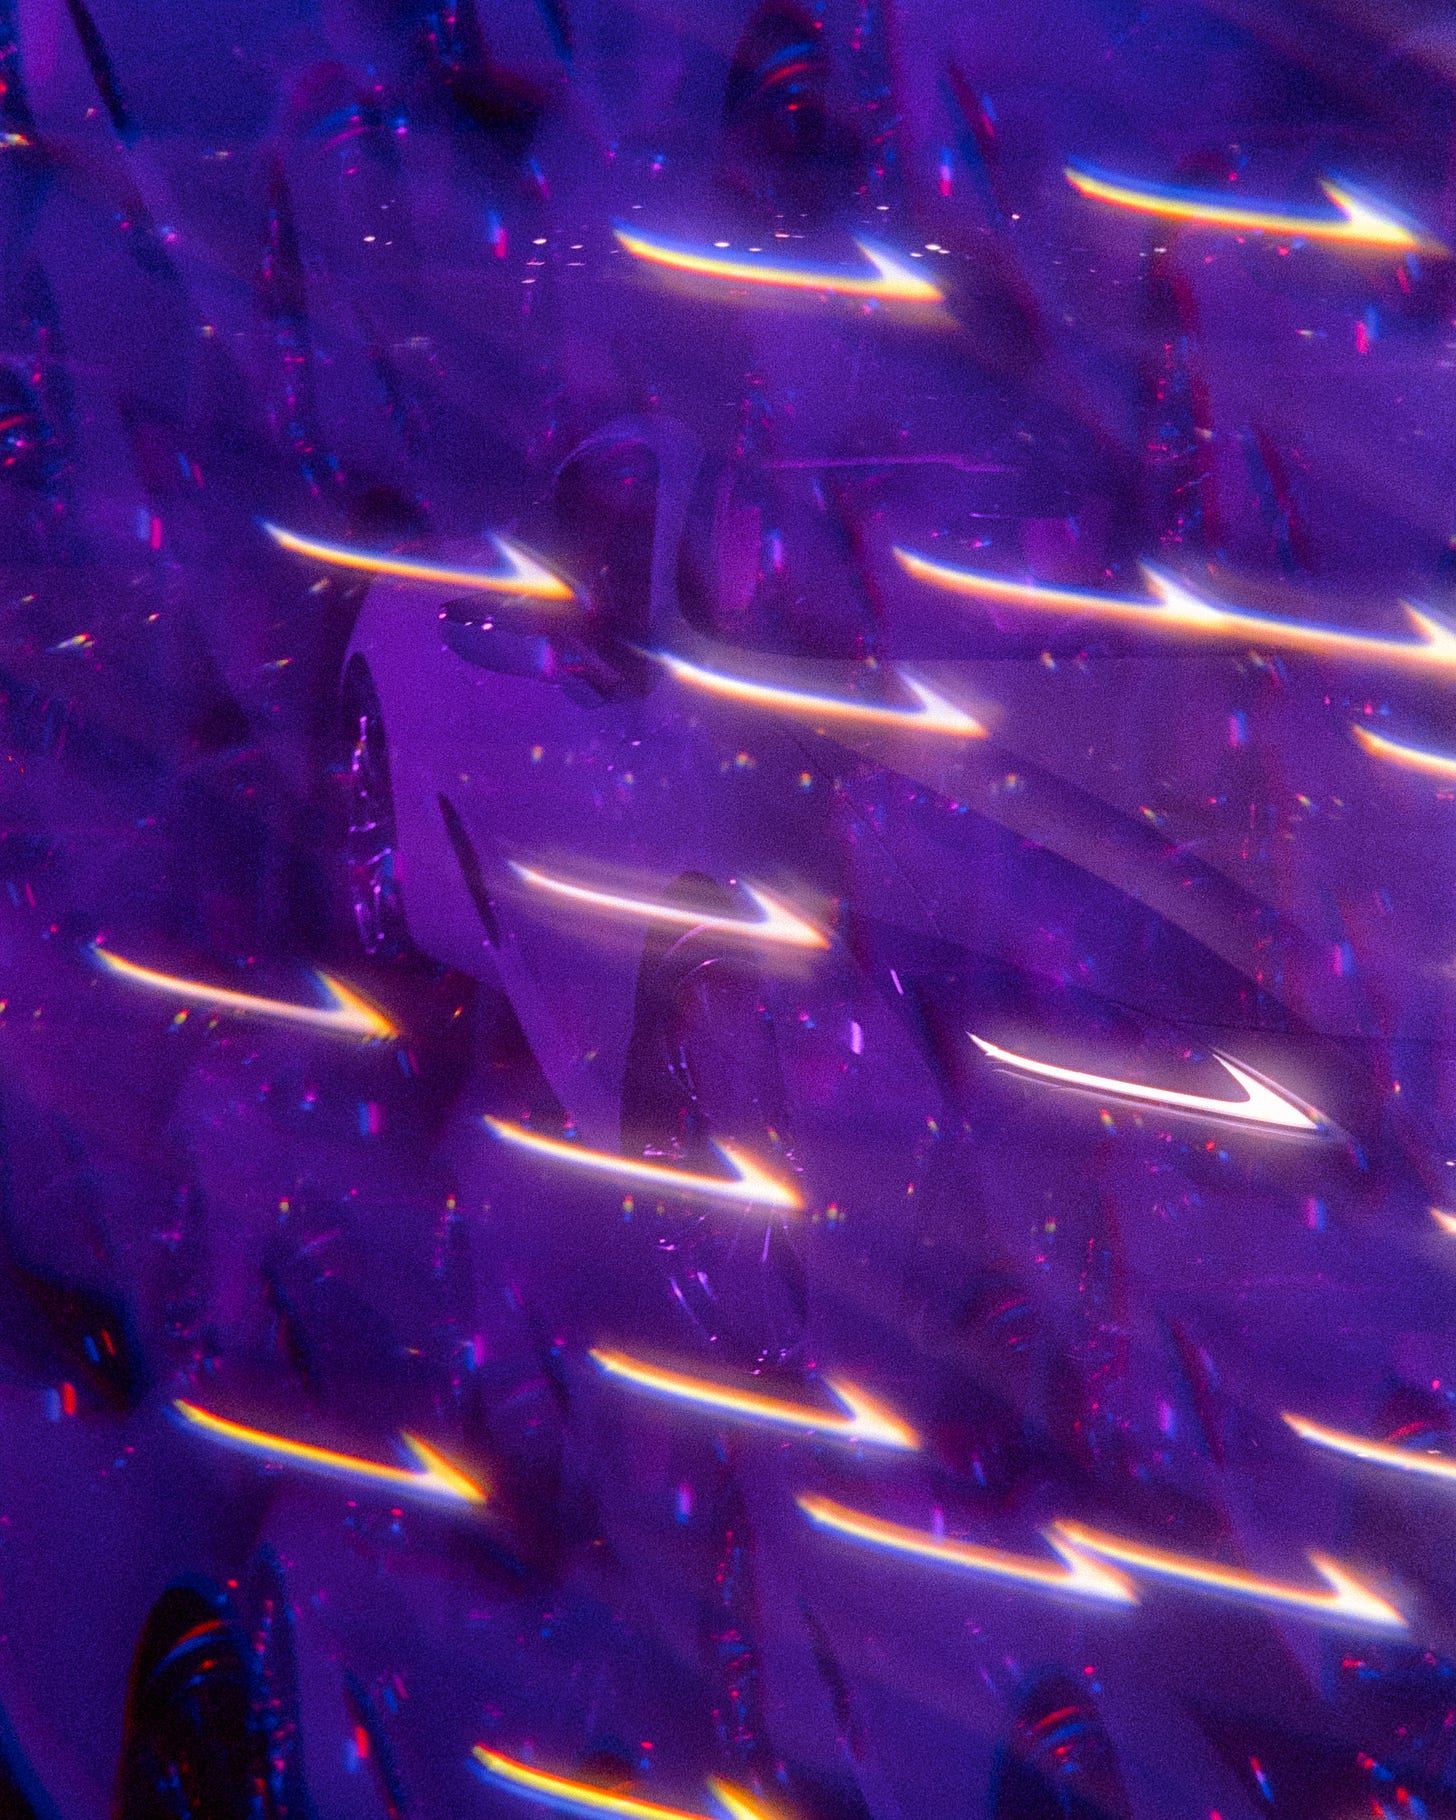 A kalideoscopic style image flooded with purple, little rainbow reflections, and a repeat image of the headlight of the car